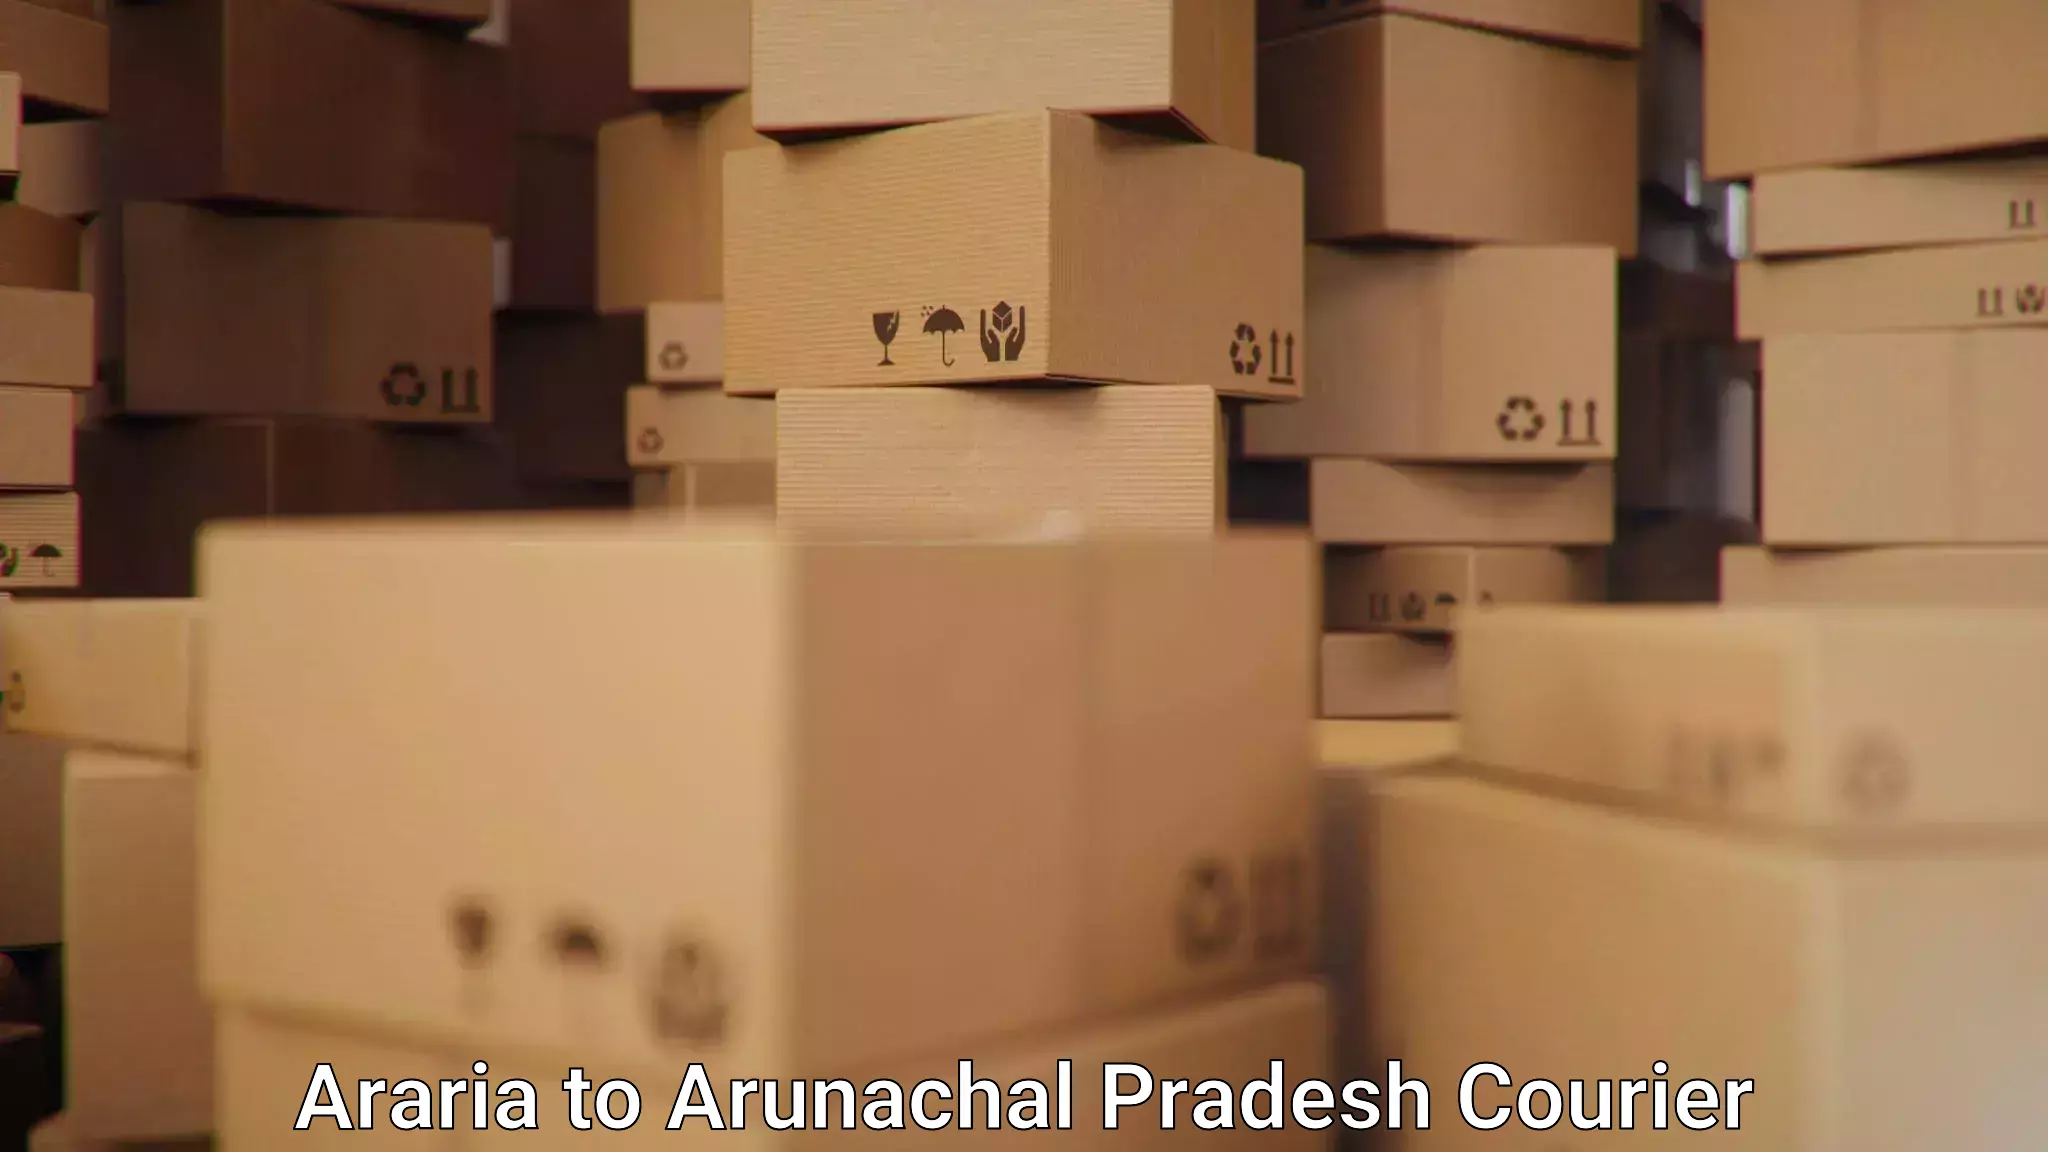 Budget-friendly shipping Araria to Lohit